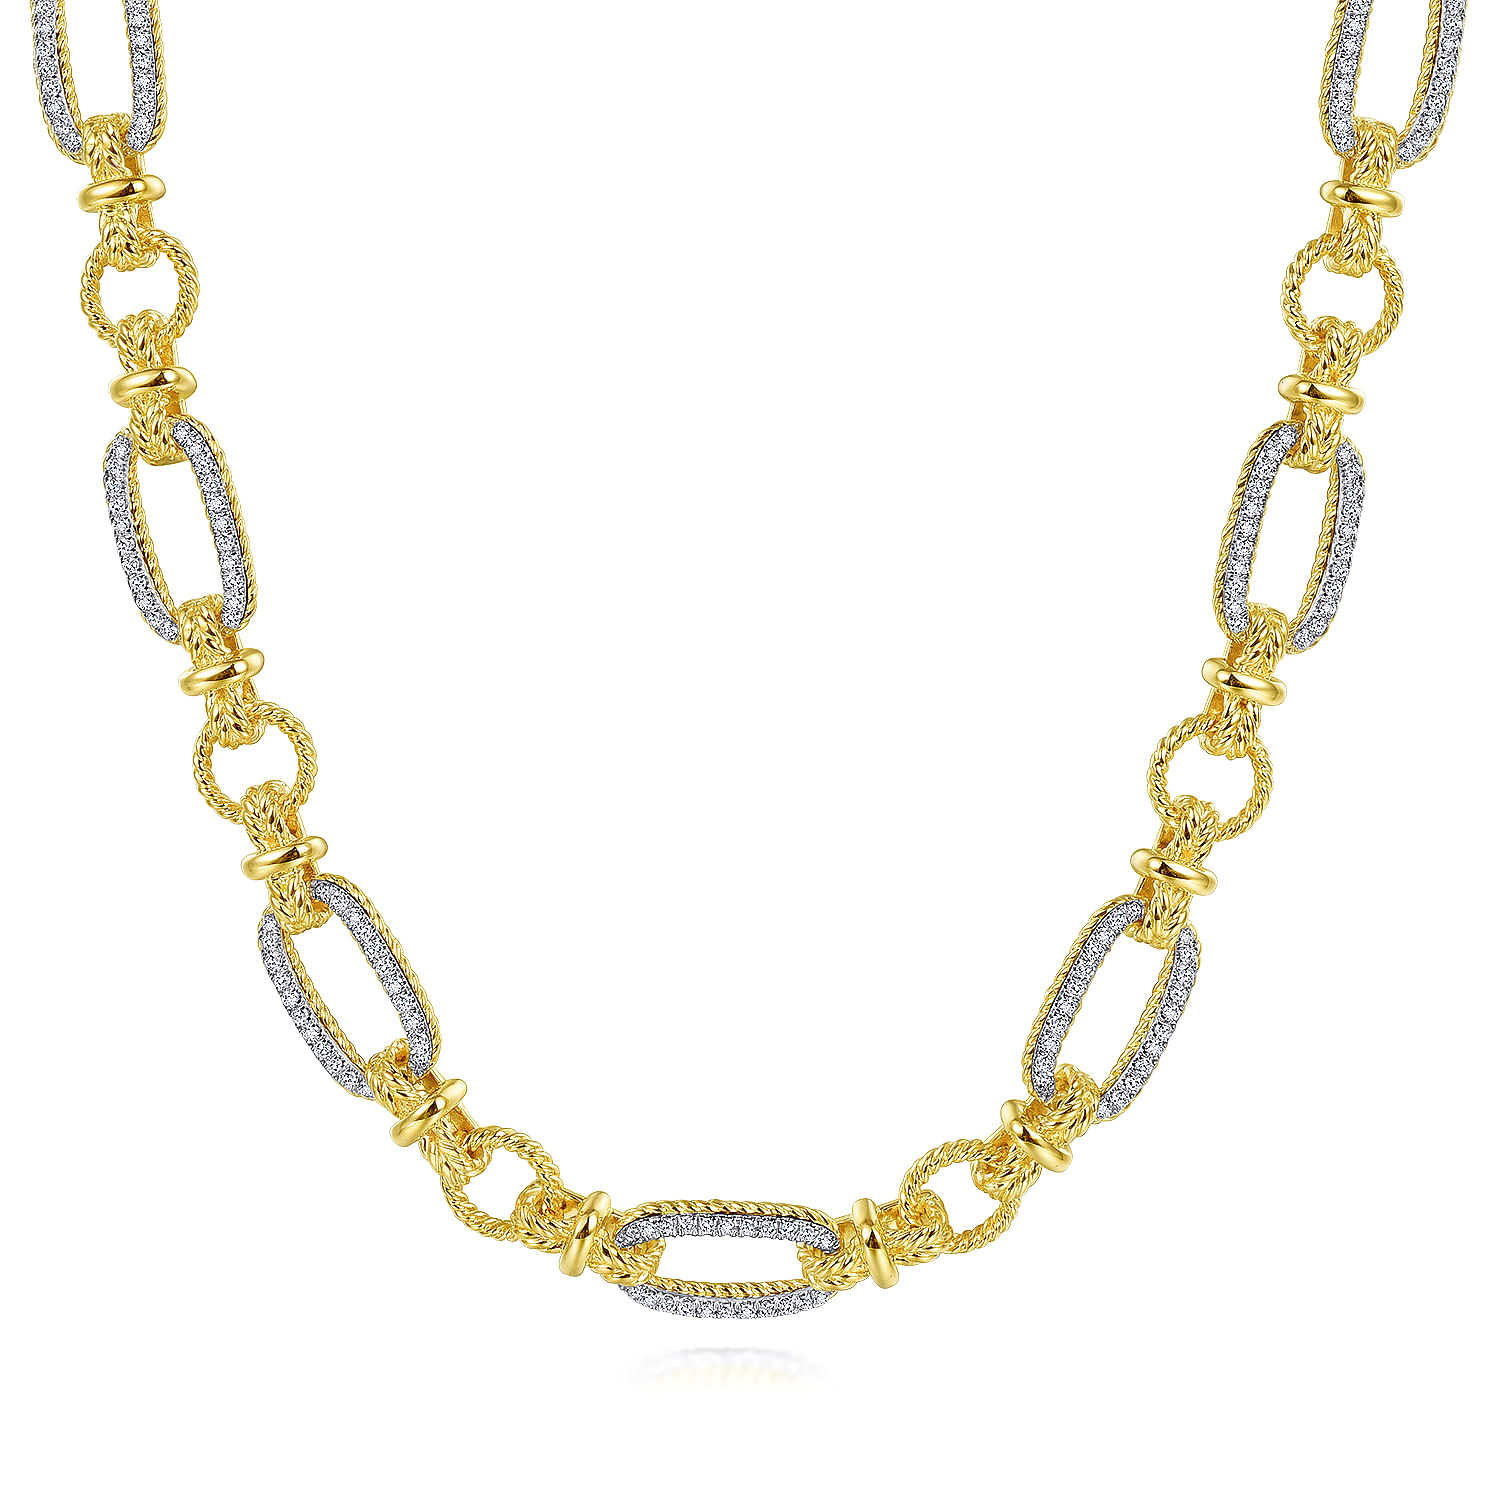 14K Yellow-White Gold Oval Chain Twisted Rope Link Necklace with Diamond Pave